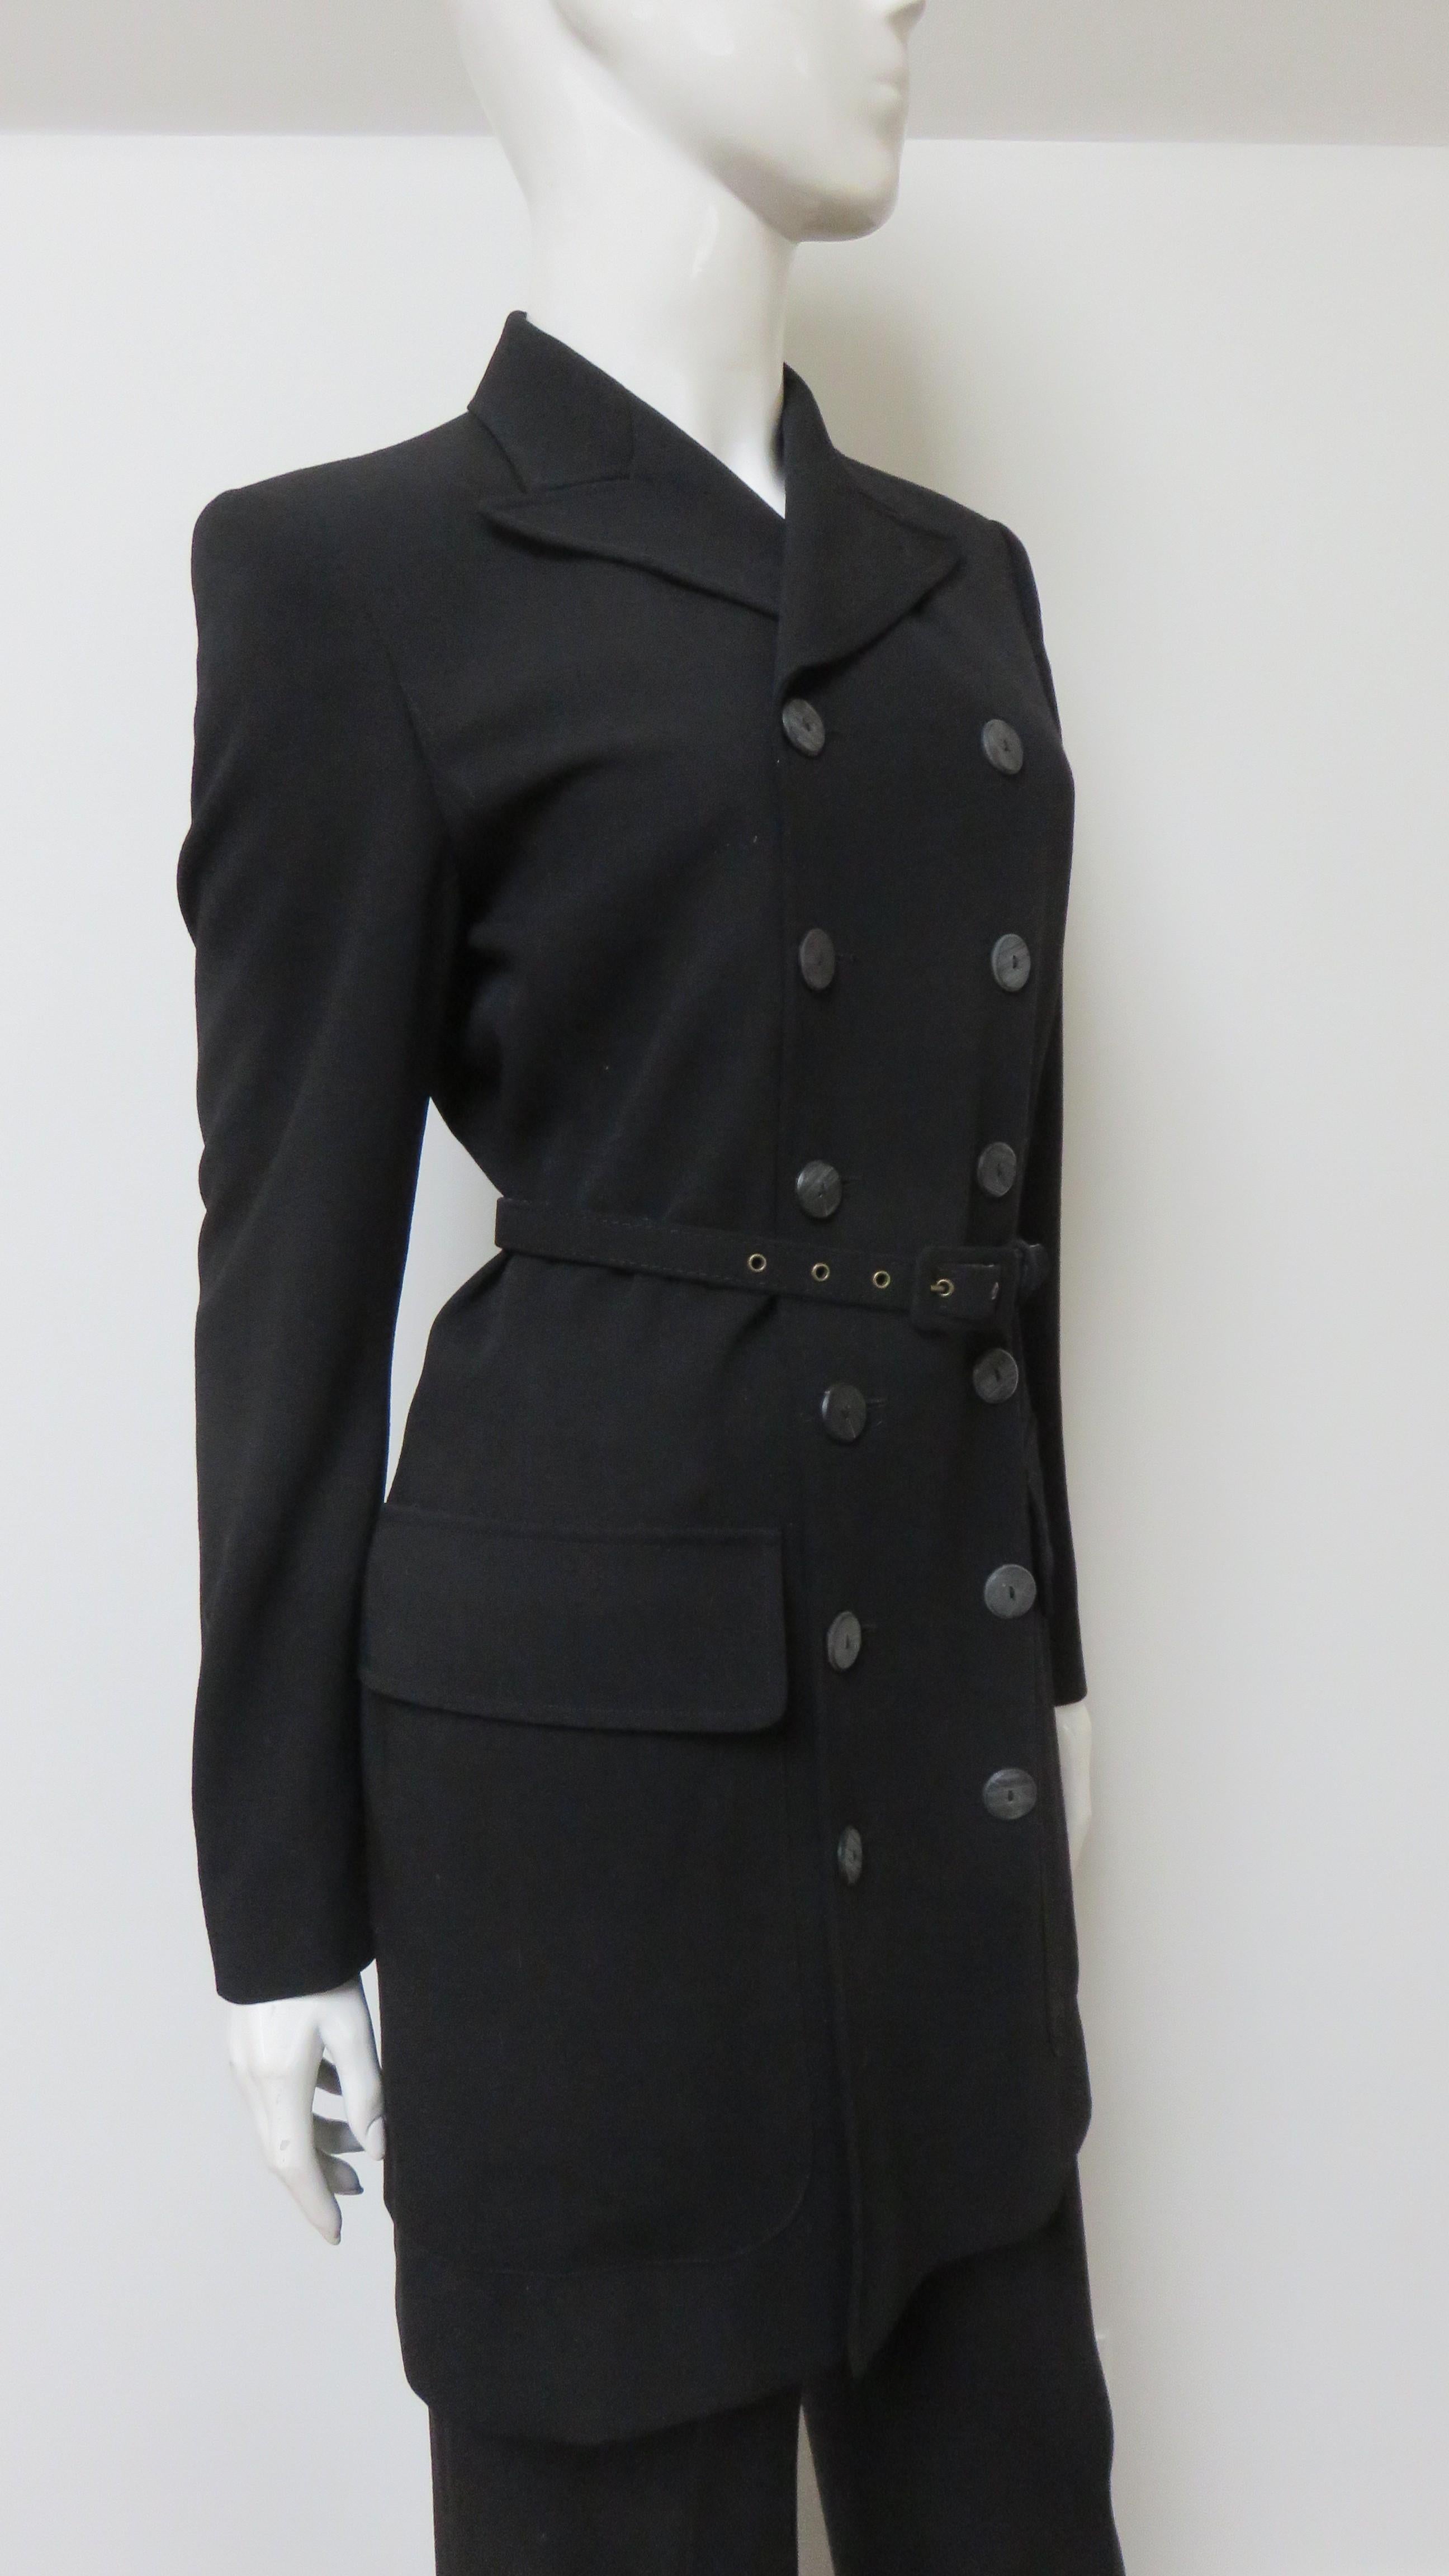 Jean Paul Gaultier Double Breasted Belted Pant Suit A/W 1999 For Sale 8